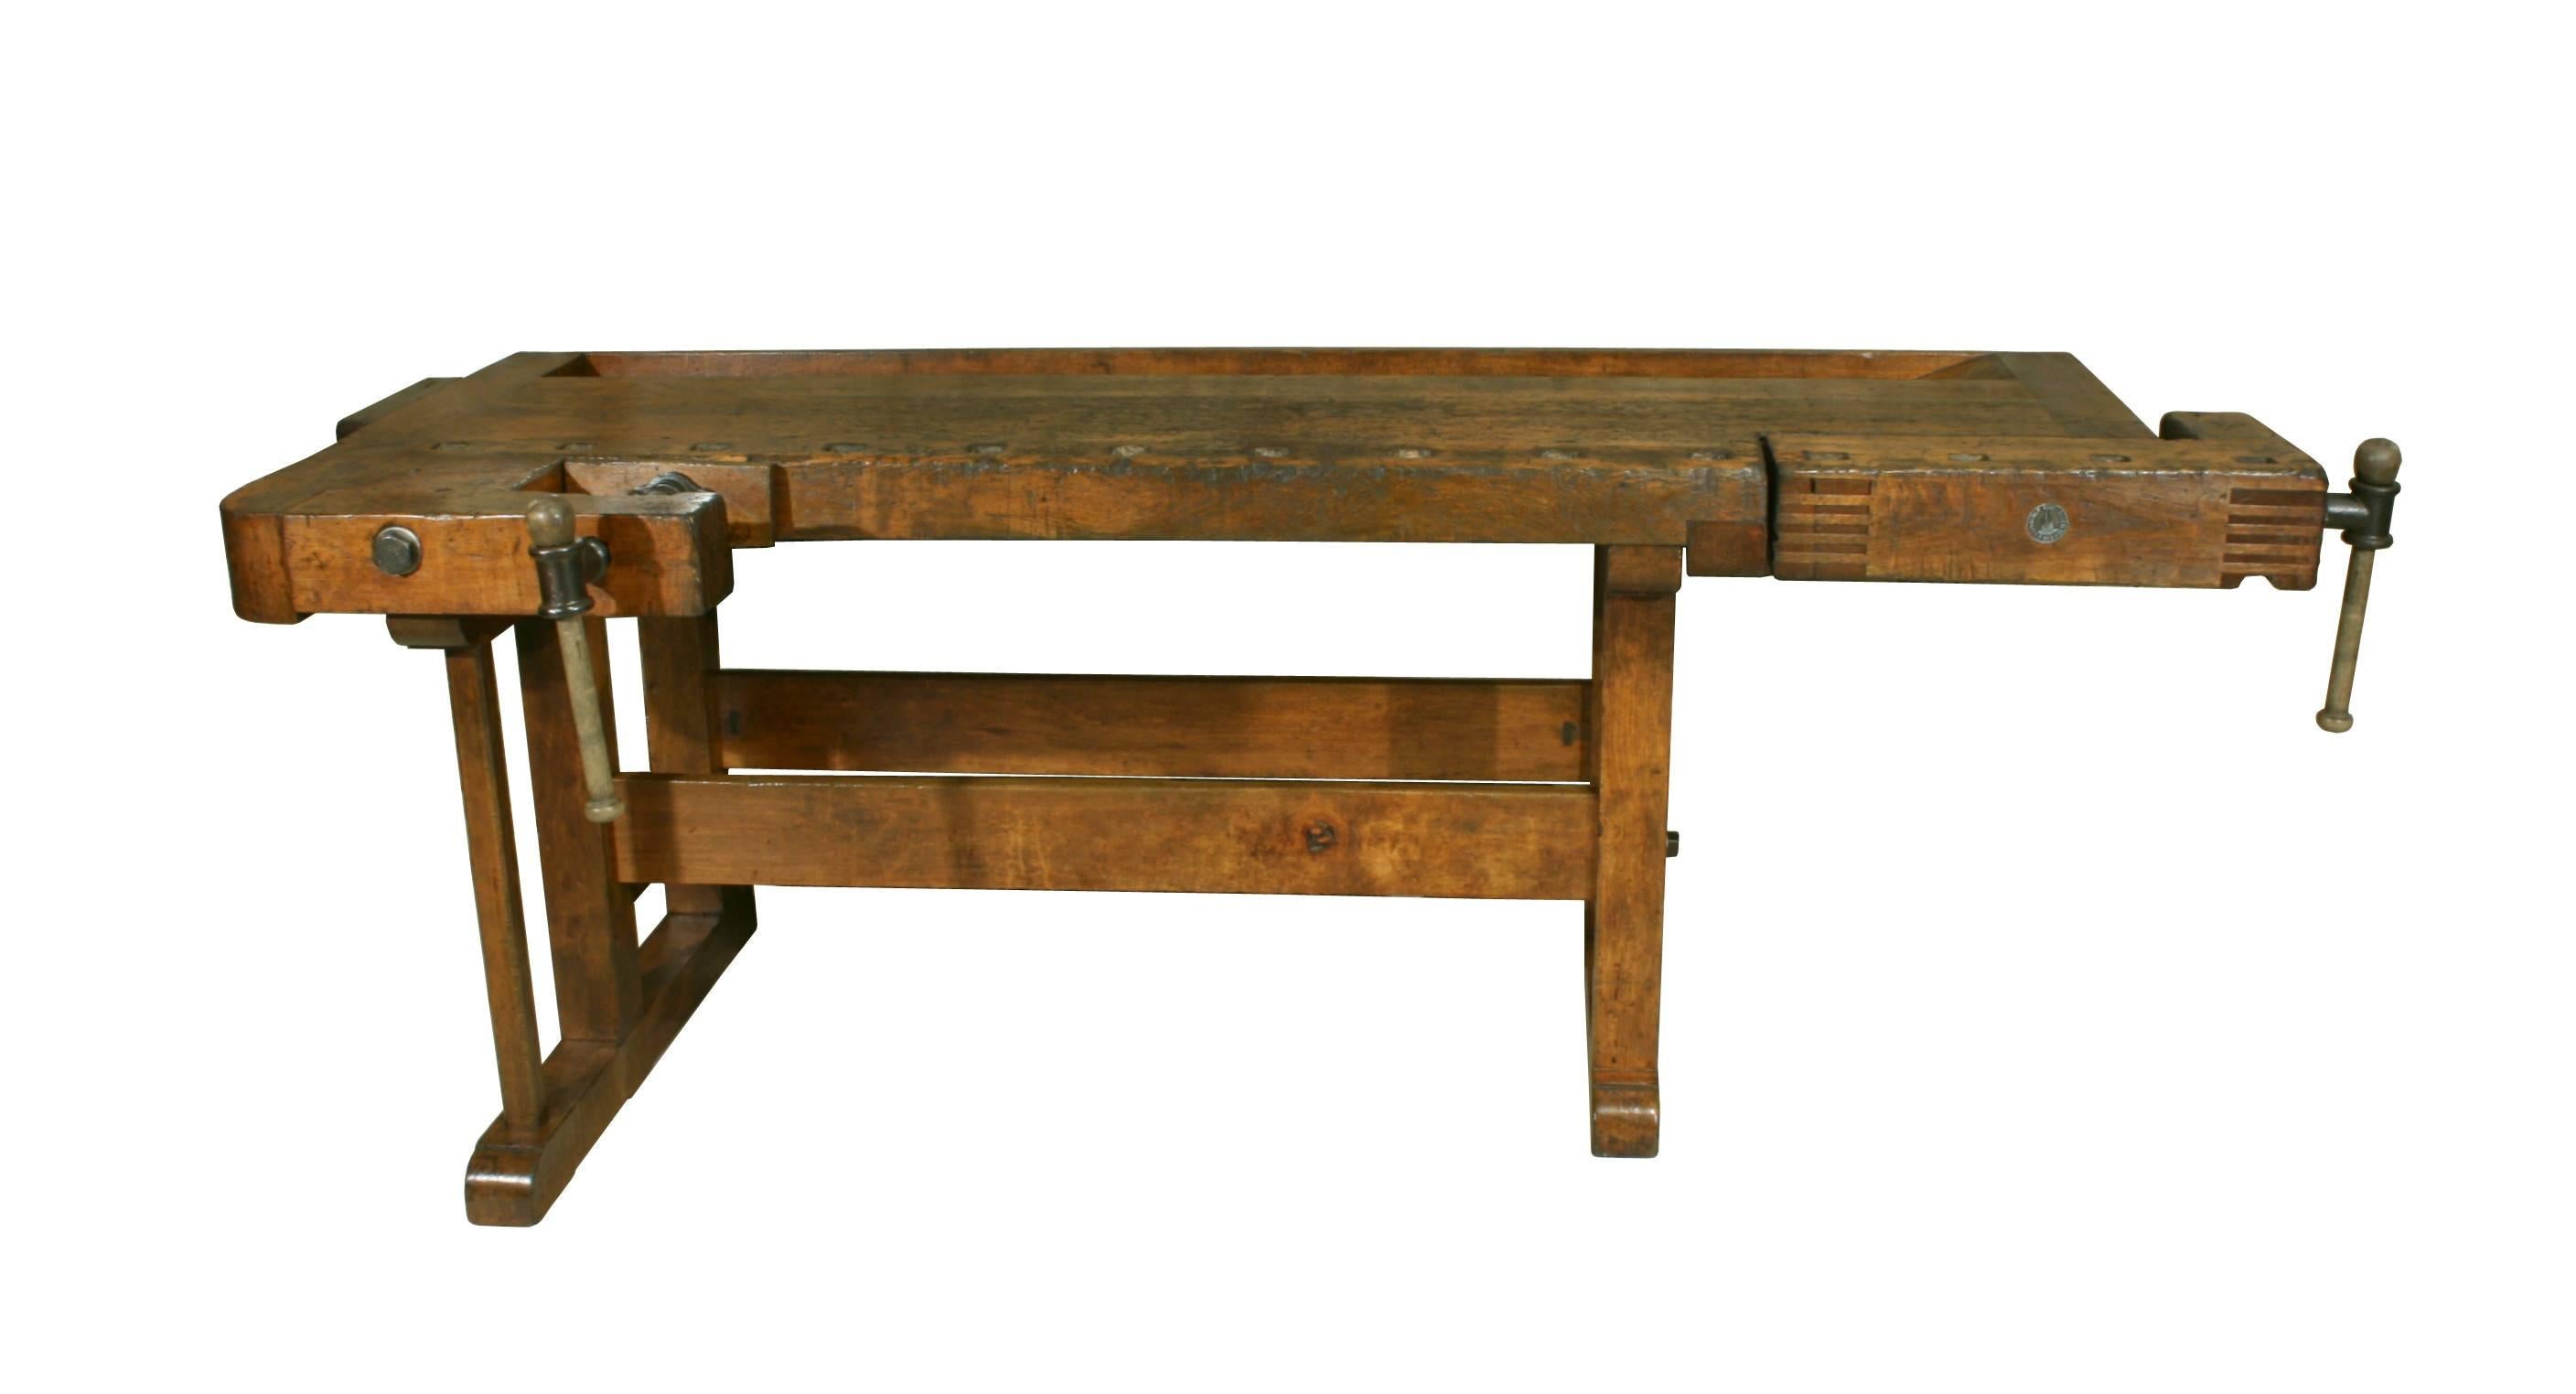 Antique Continental Carpenter’s Workbench. 
A wonderful large work bench with solid beech wood top and beech legs with a good warm rich patina. The bench has two vices, one on the front edge and the other on the right hand side. The top leading